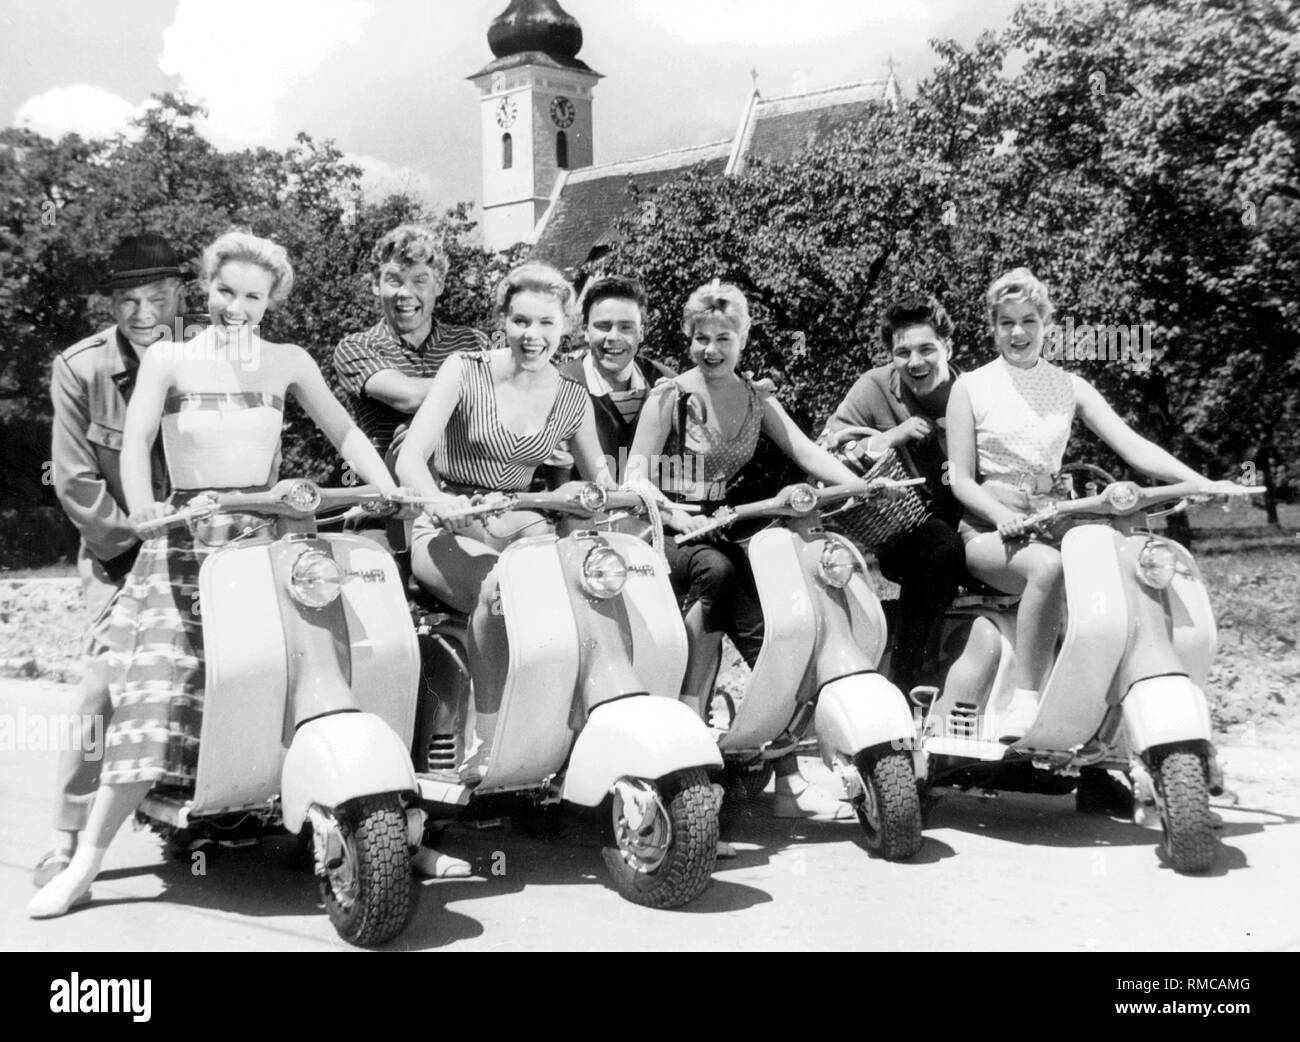 Filmstill from 'Vier Maedels aus der Wachau' with Harald Dietl, Heinz Conrads, Michael Cramer, Thomas Hoerbiger, Alice and Ellen Kessler, Isa and Jutta Guenther. They sit on scooters. Stock Photo